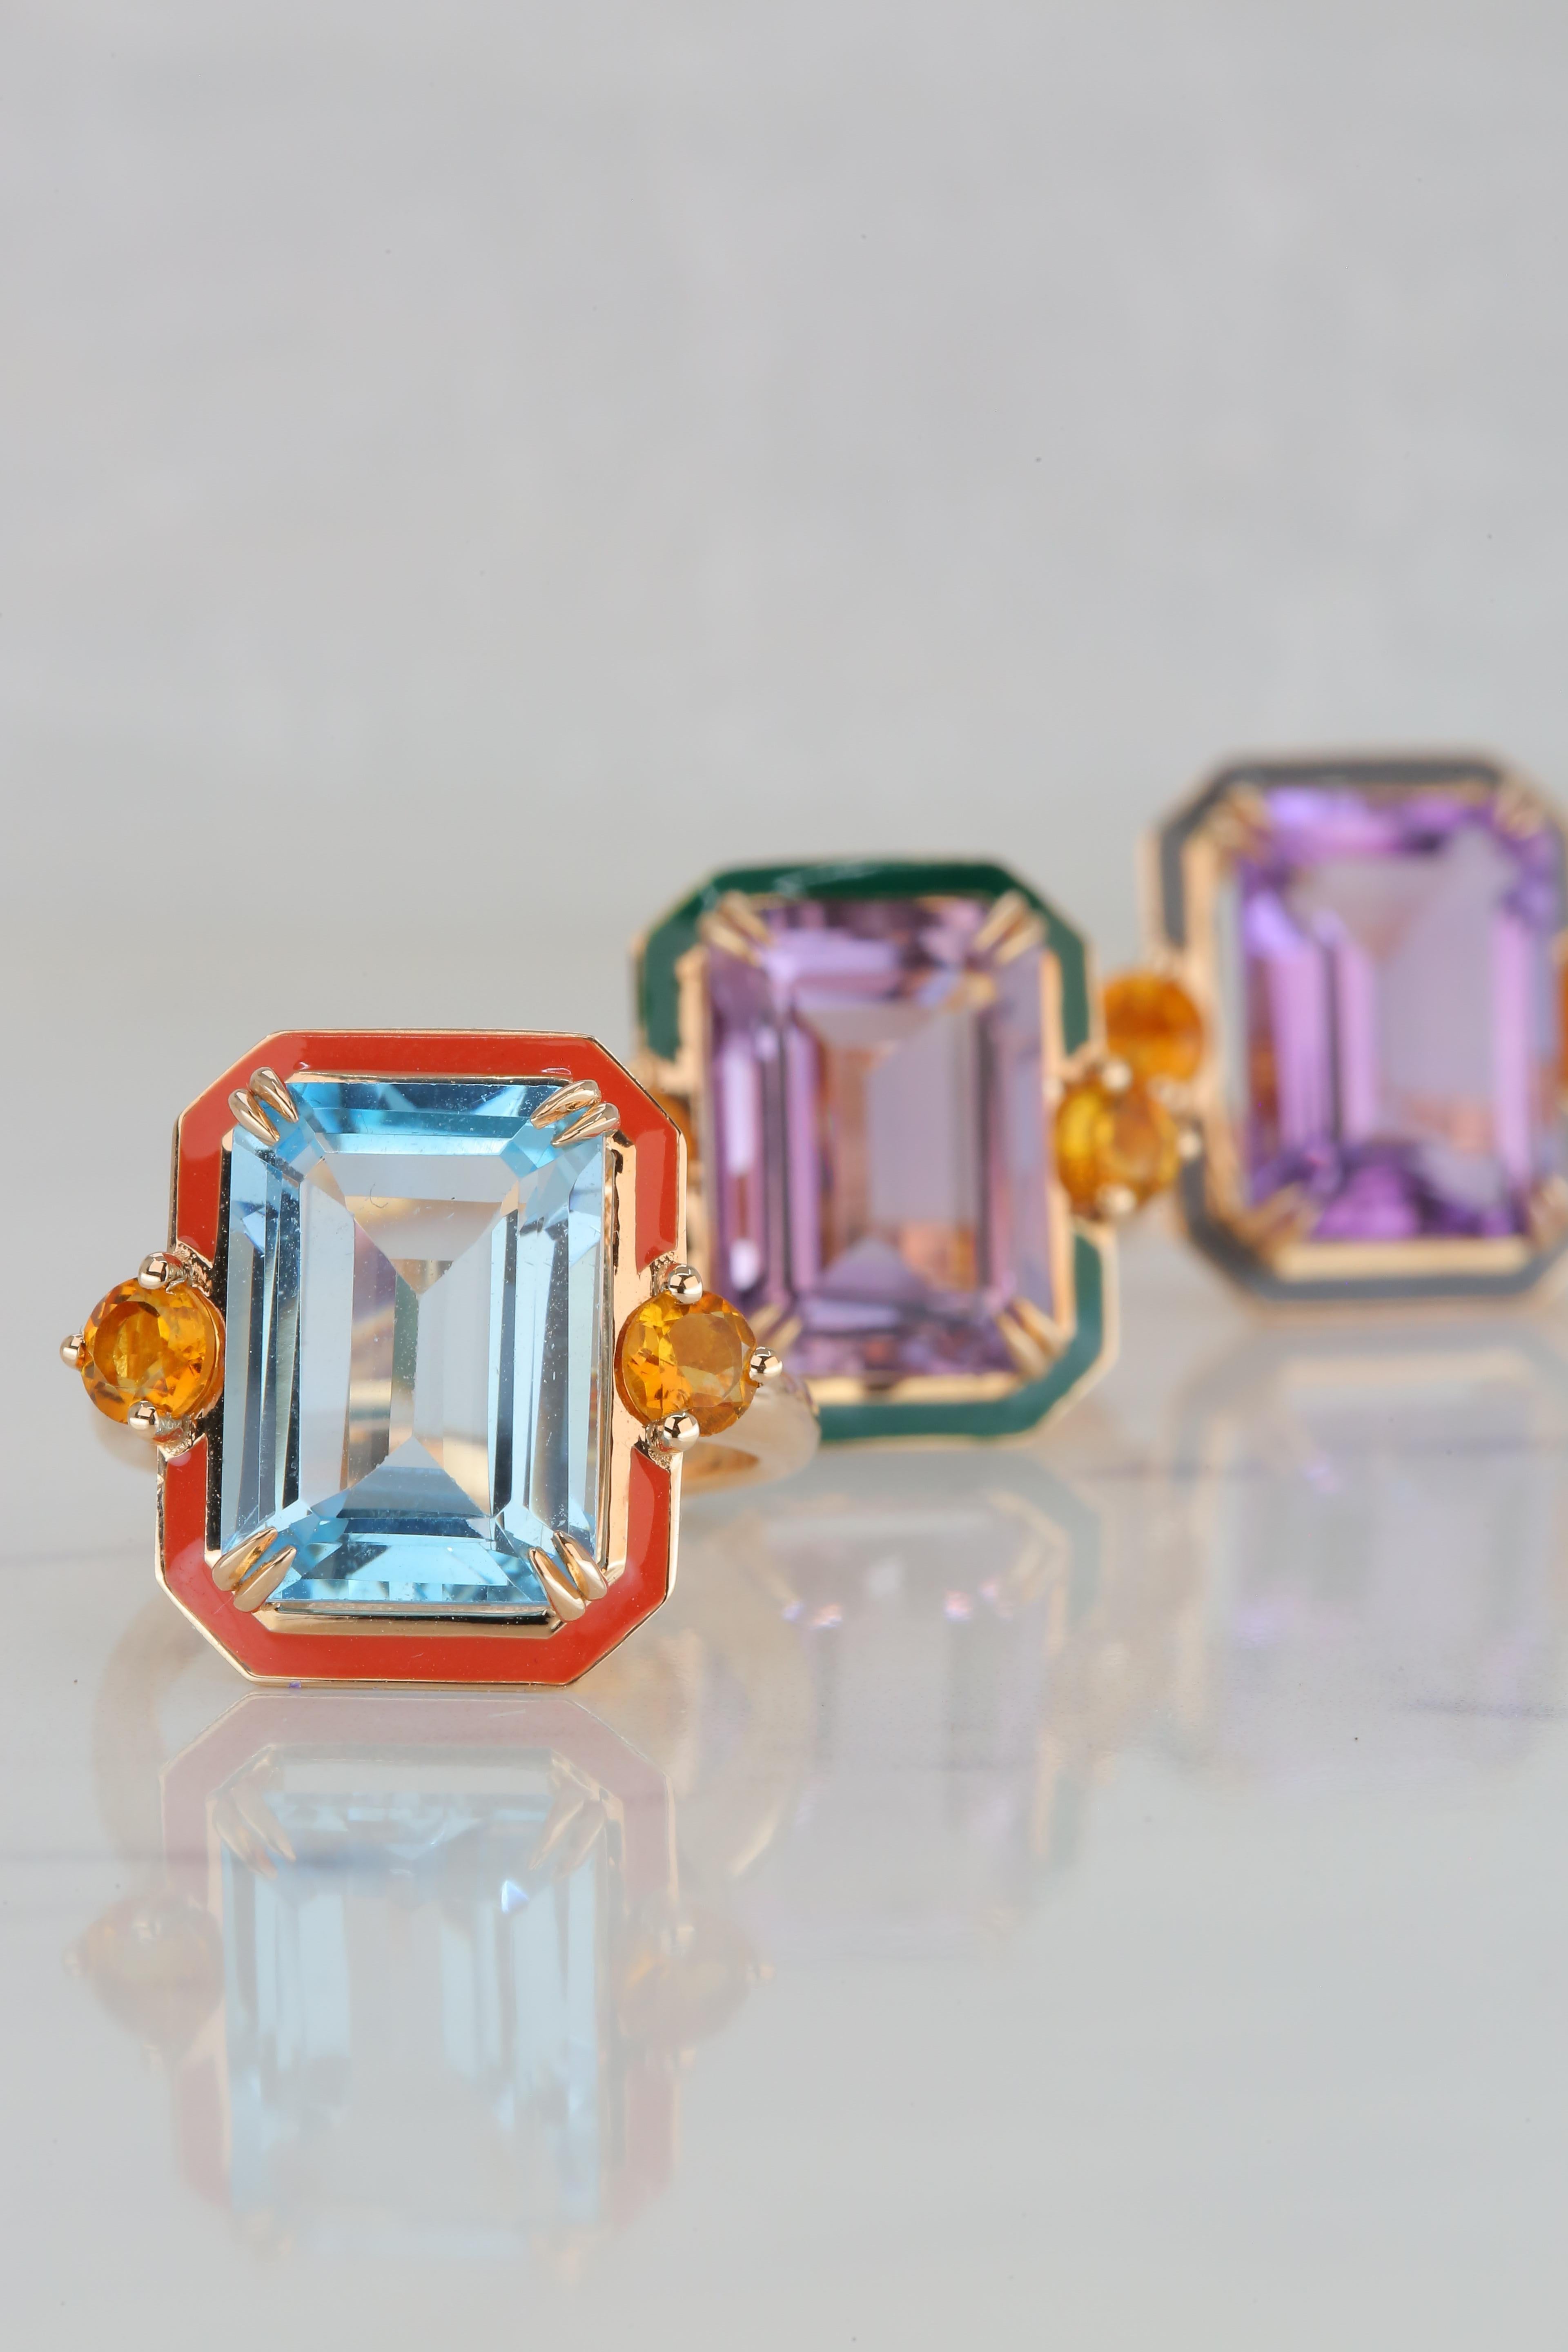 For Sale:  14K Gold Artdeco Style Enameled Cocktail Ring with 5.68 Ct Sky Topaz and Citrine 9